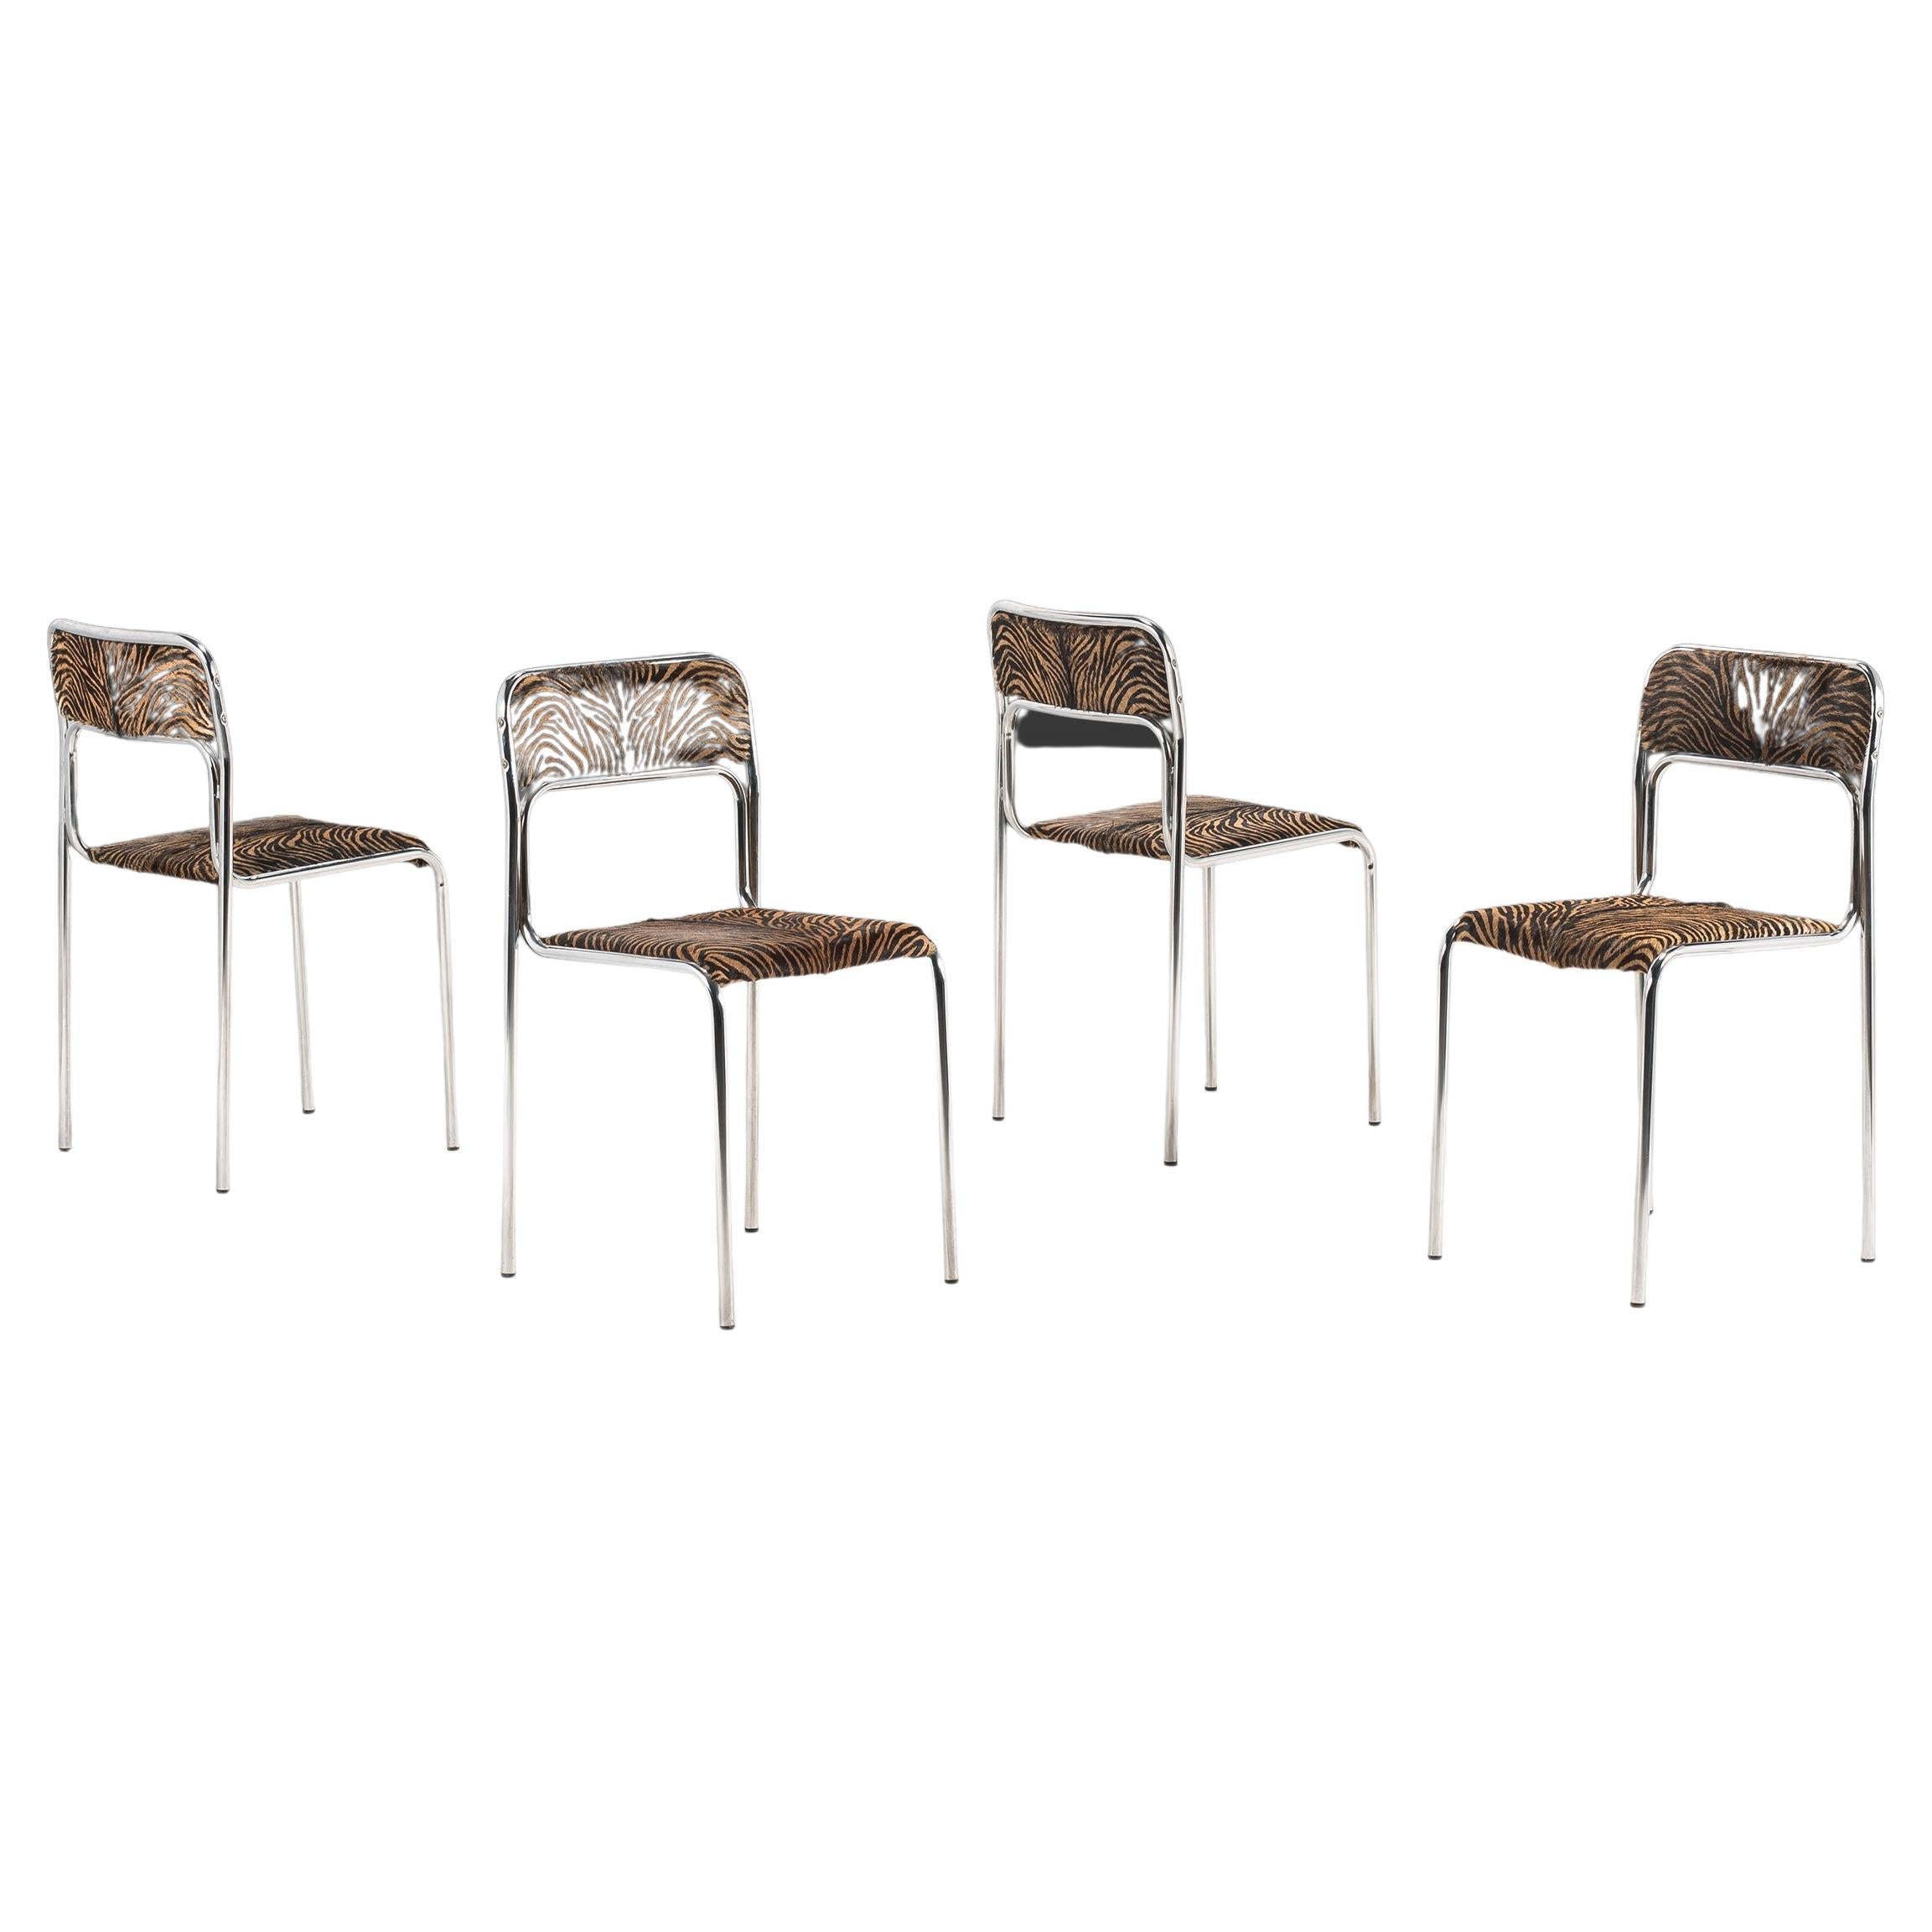 Set of Four '4' Italian Dining Chairs Attributed to Otto Gerdau, Italy, c. 1970s For Sale